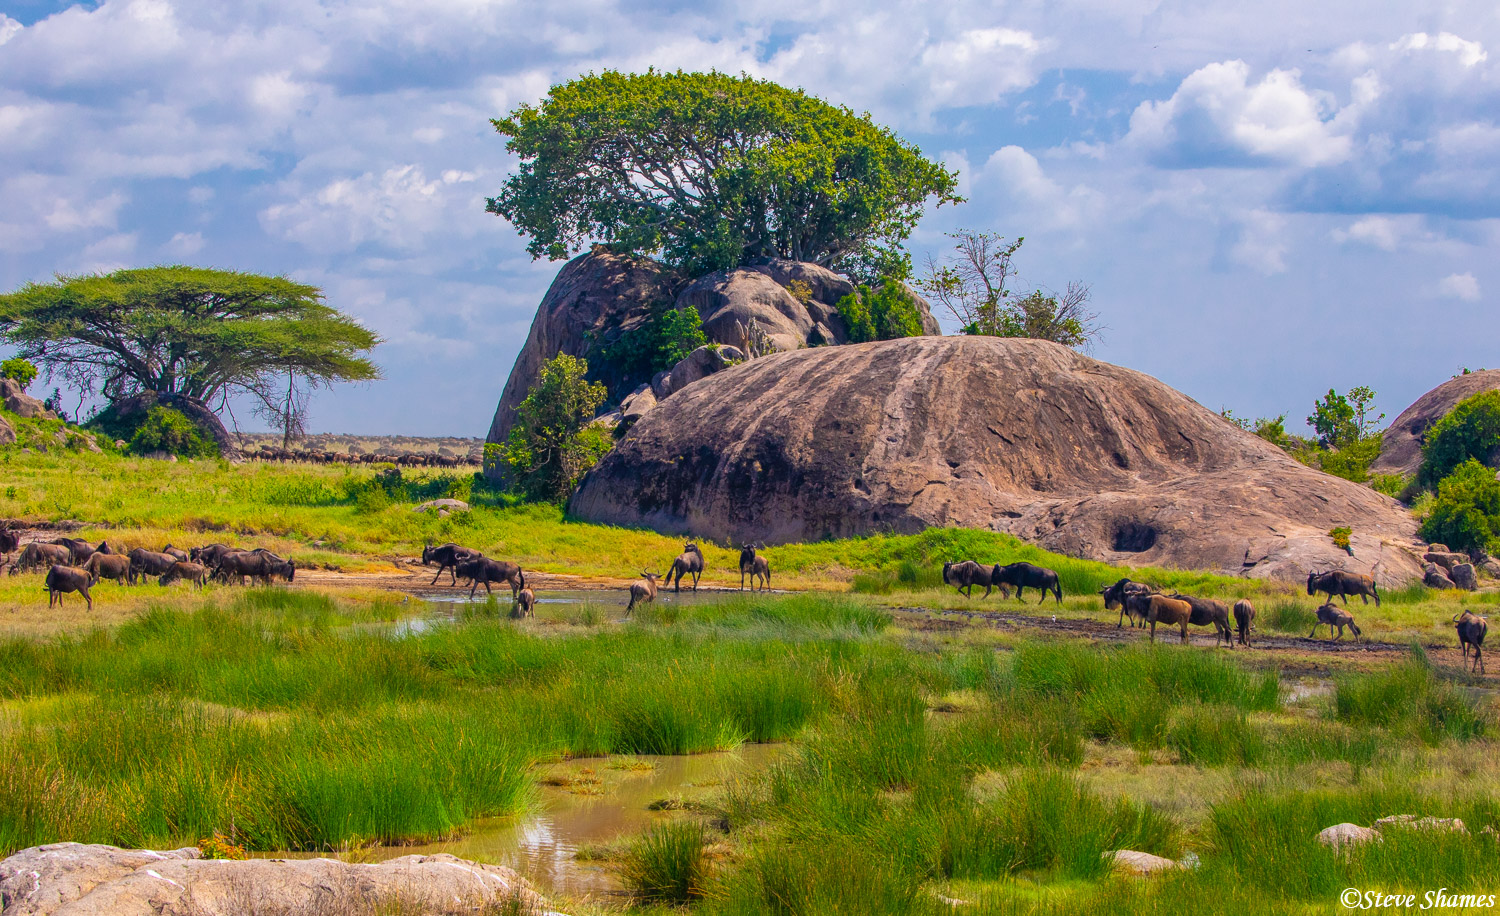 A rocky landscape scene in Africa, with the ever present wildebeest on the move.